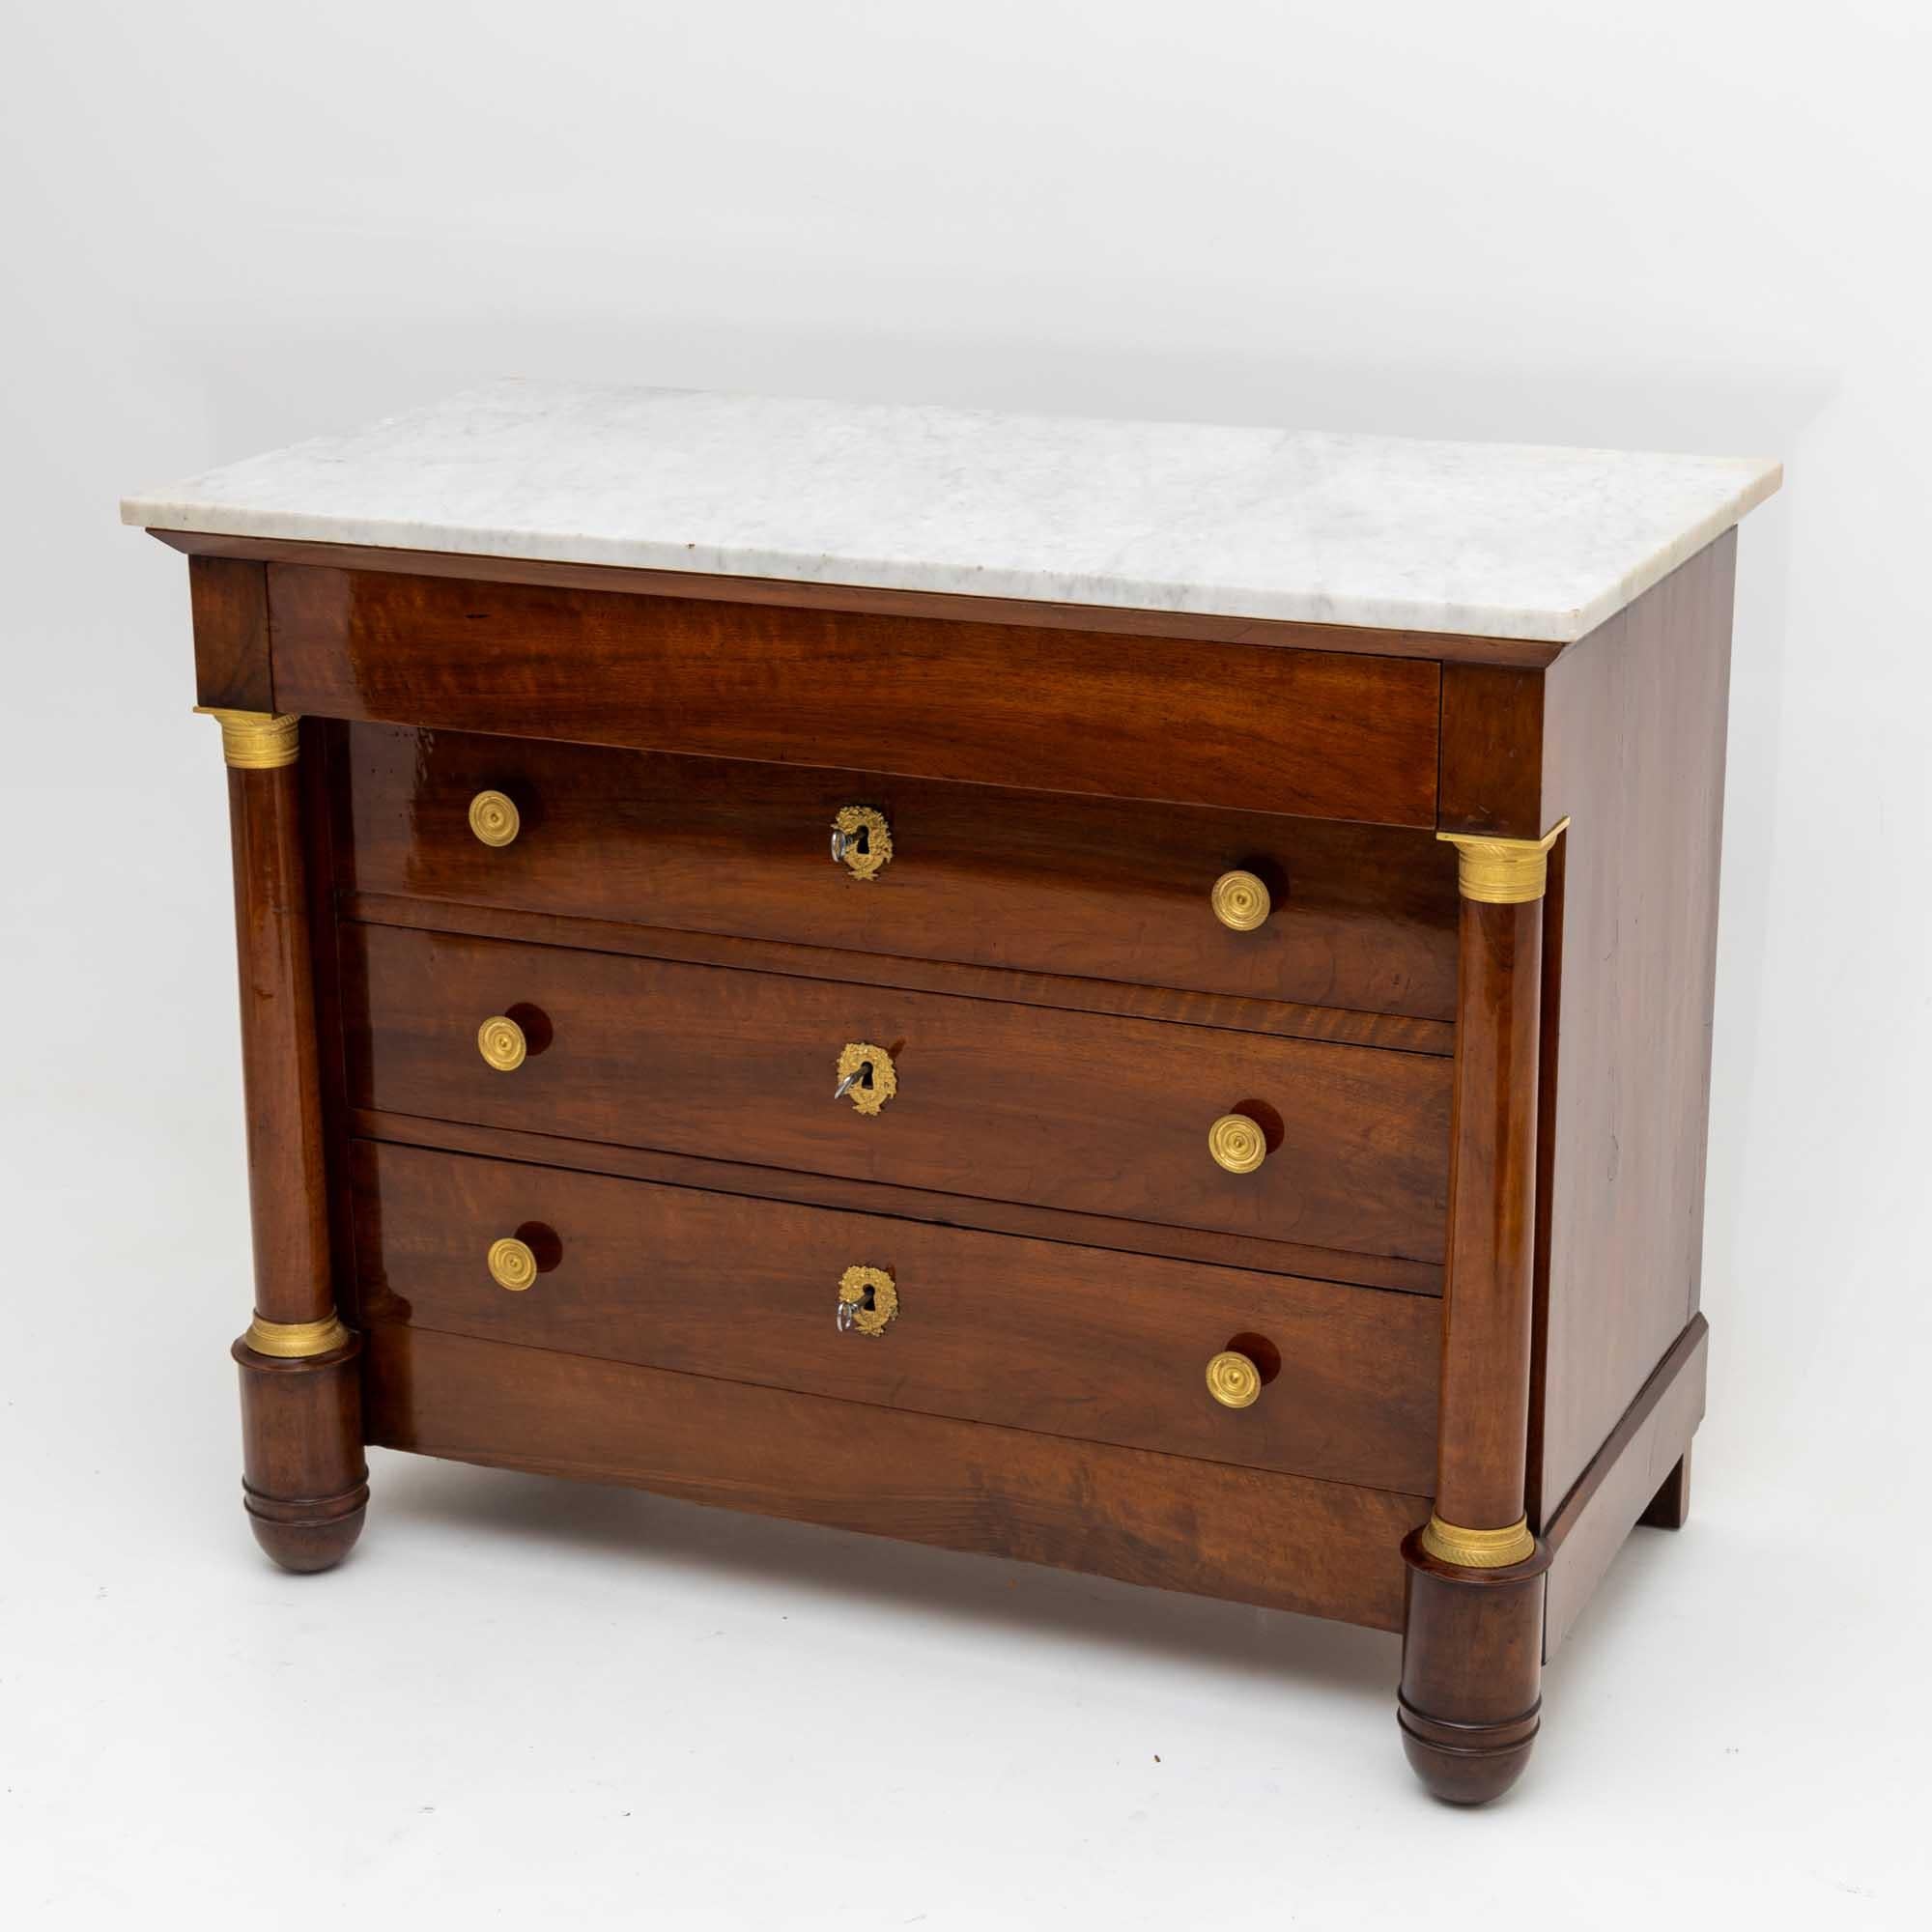 French Empire Chest of Drawers with White Marble Top, France Early 19th Century For Sale